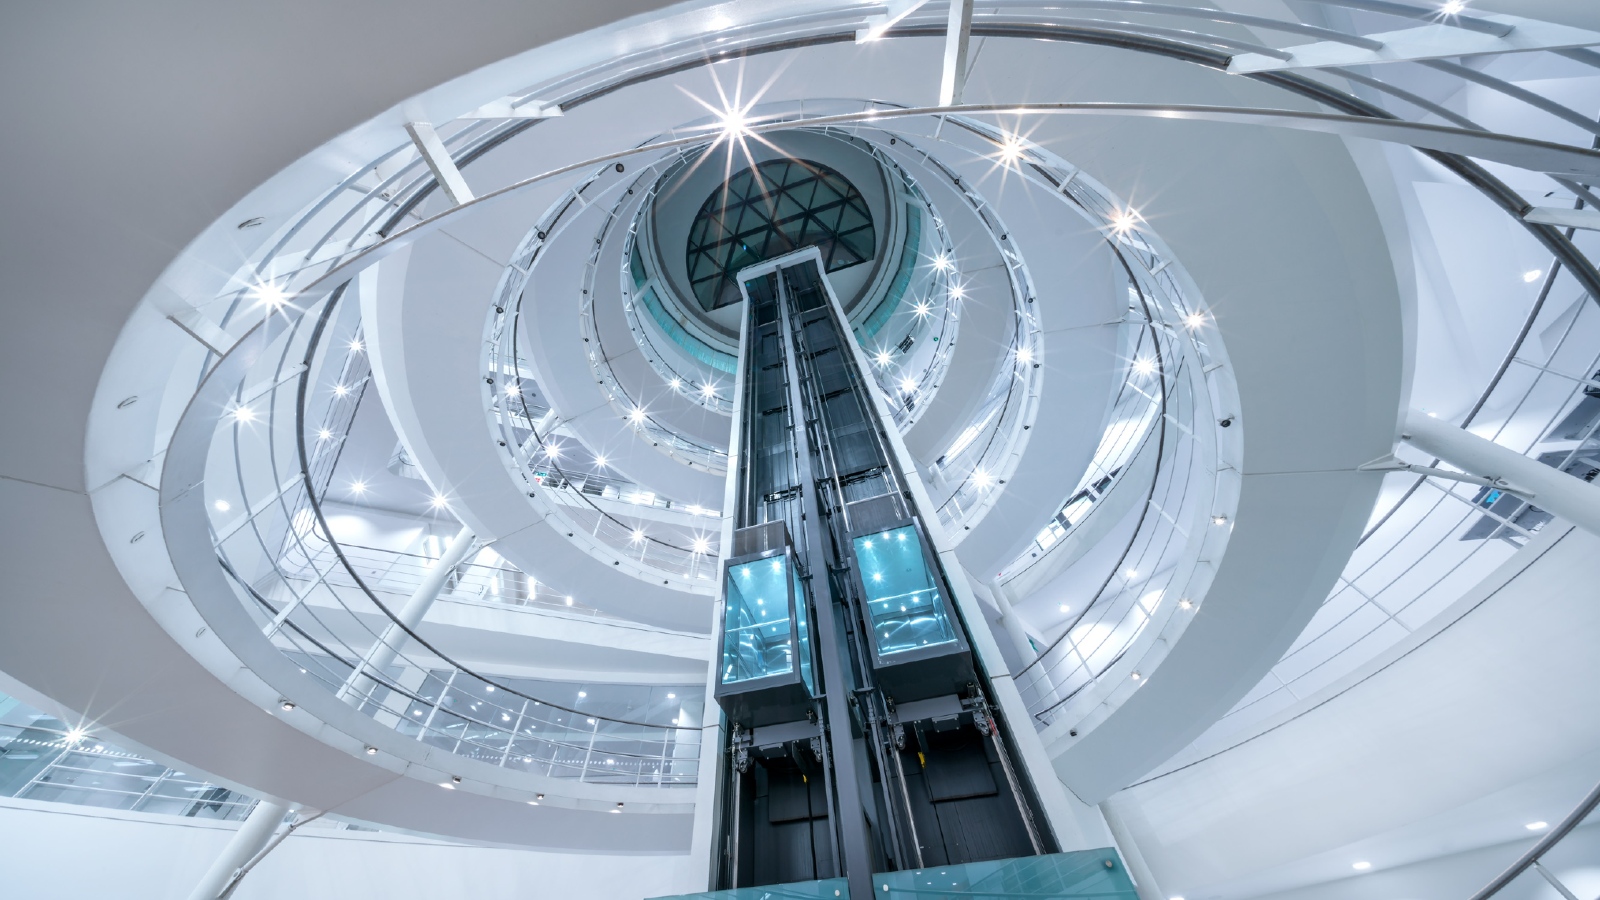 A view from inside the Library on the lower ground floor looking upwards through the void to the dome at the top of the building. It includes the the two lifts and the spiral staircase which is illuminated with lights.